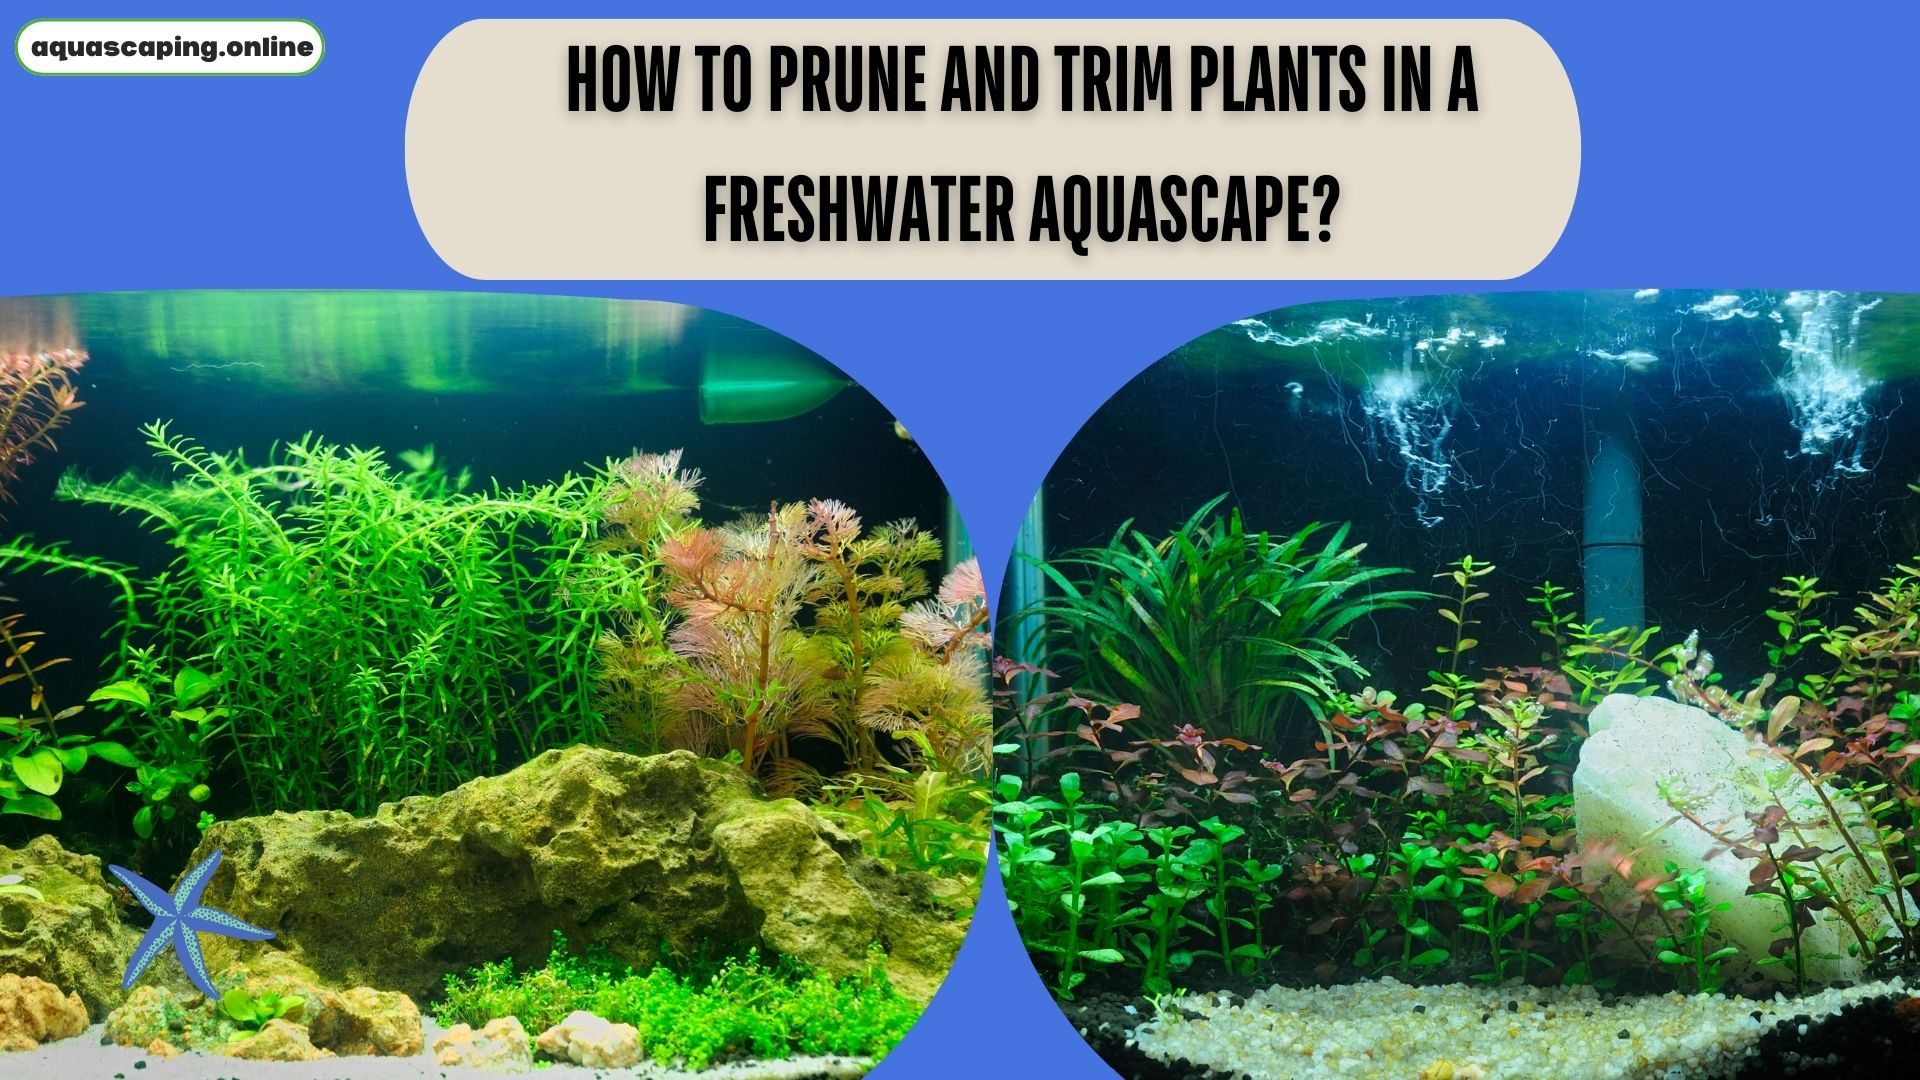 Prune and trim plants in a freshwater aquascape